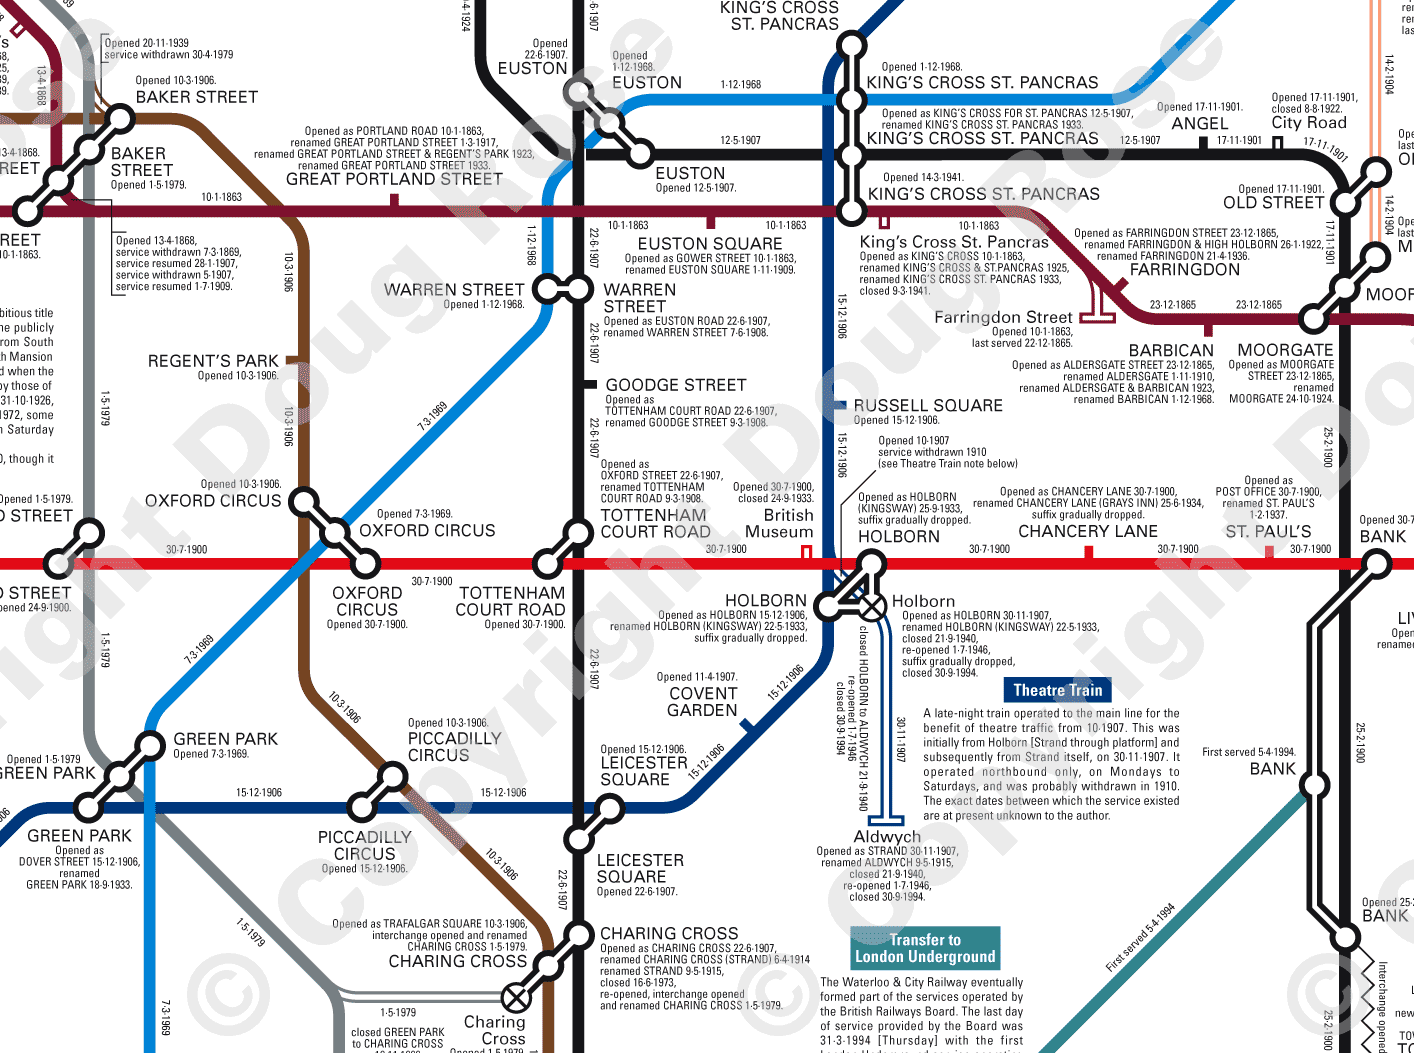 The London Underground: A Diagrammatic History - click to go back